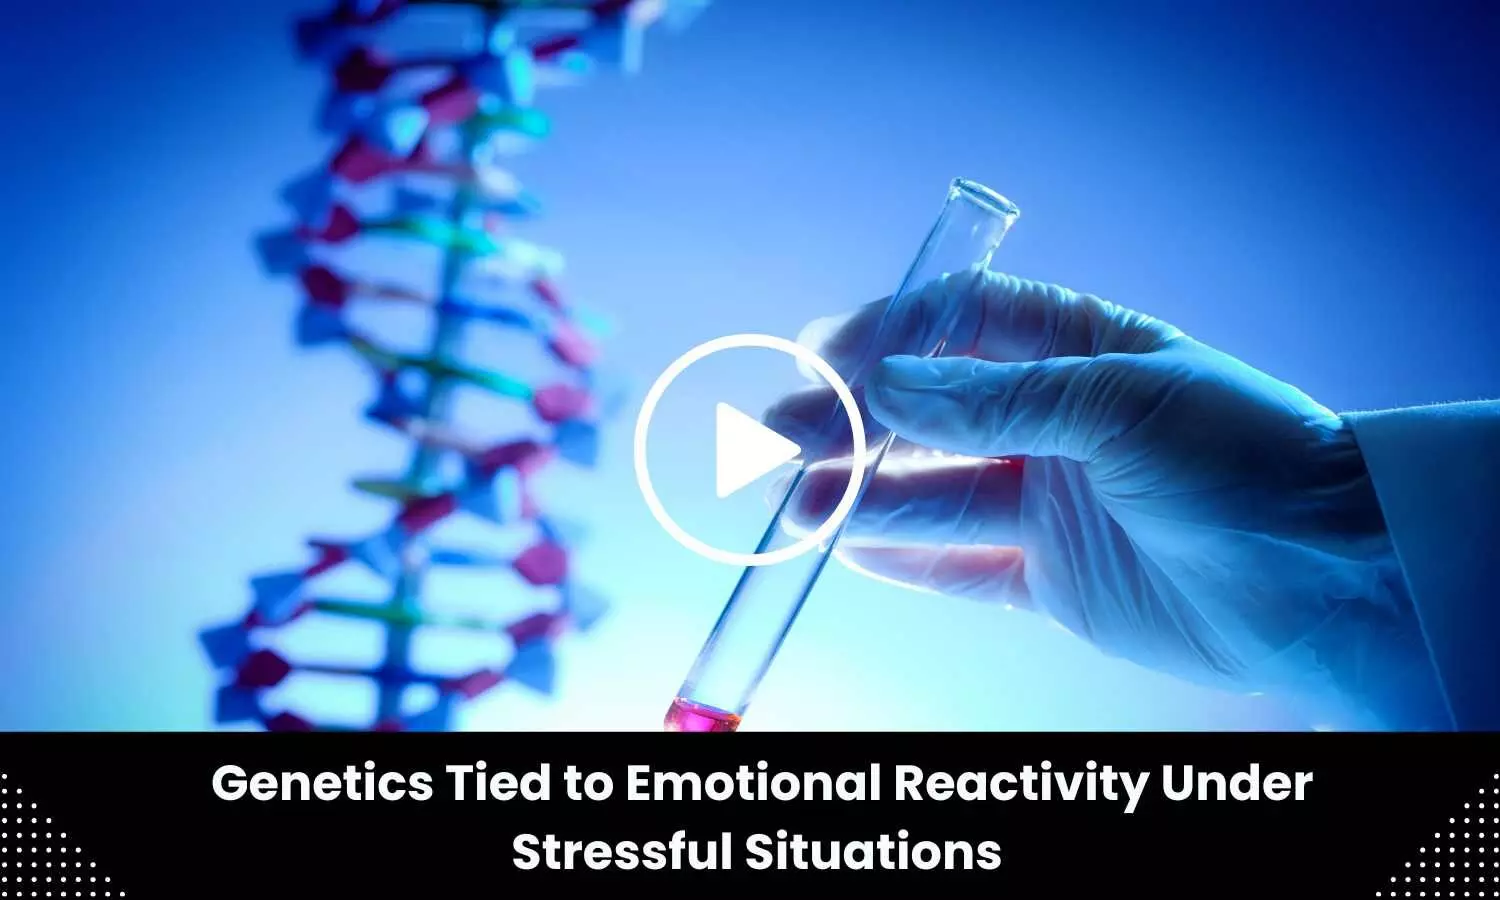 Genetics tied to emotional reactivity under stressful situations